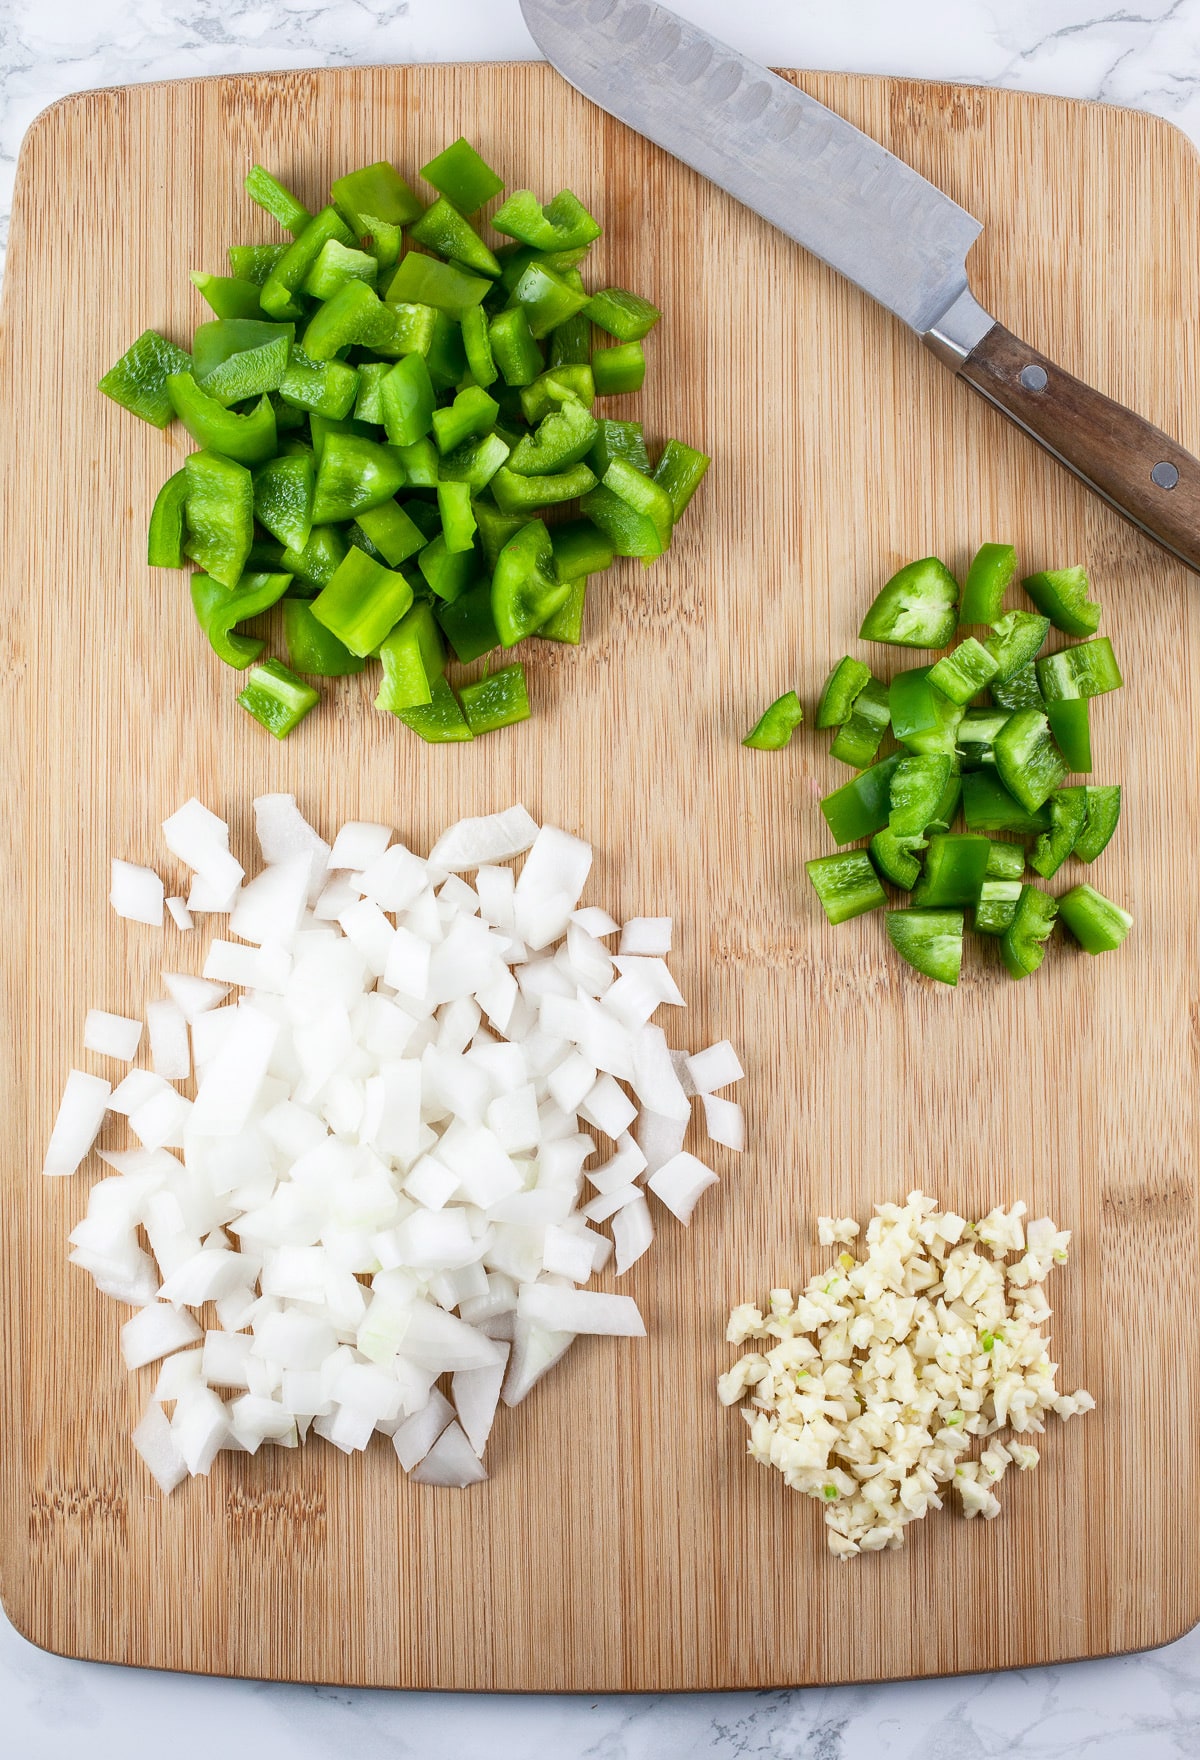 Minced garlic, onions, jalapeno, and bell peppers on wooden cutting board with knife.